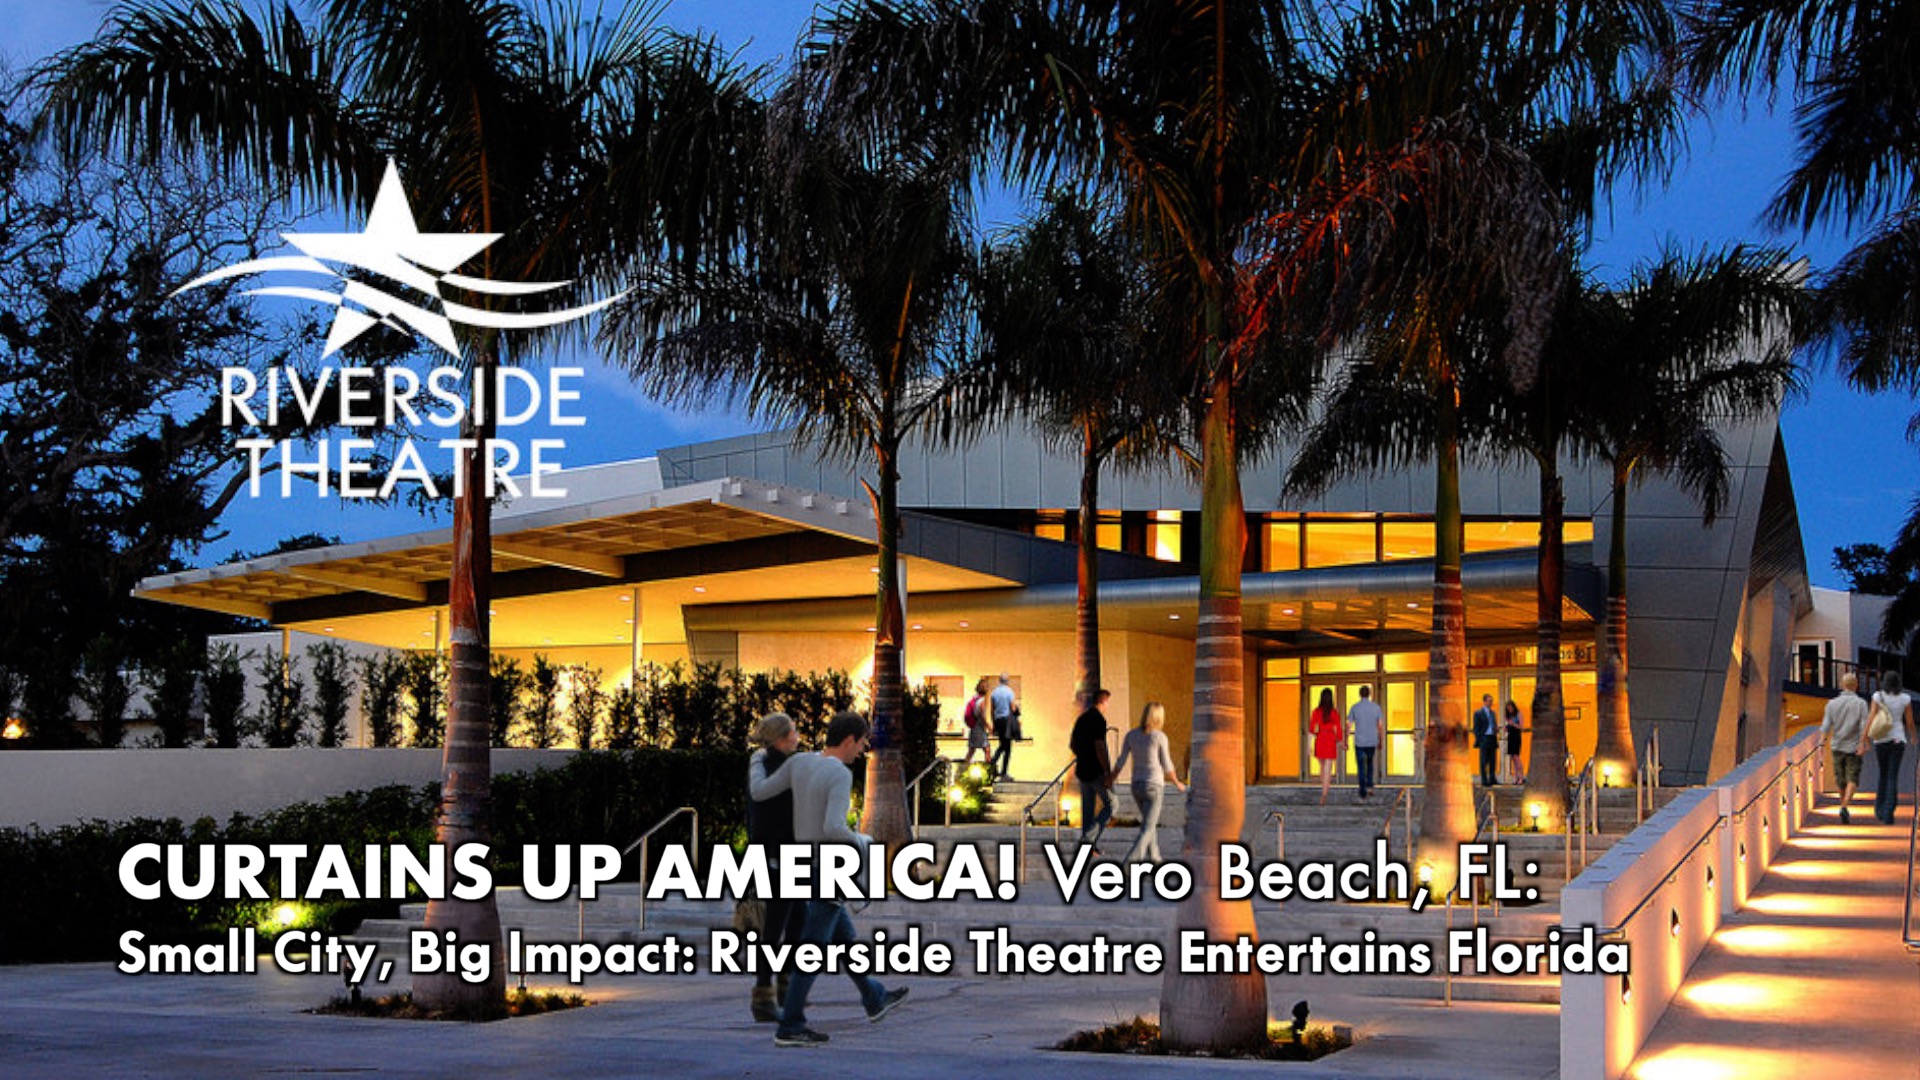 CURTAINS UP AMERICA! Small City, Big Impact: Riverside Theatre Entertains Florida